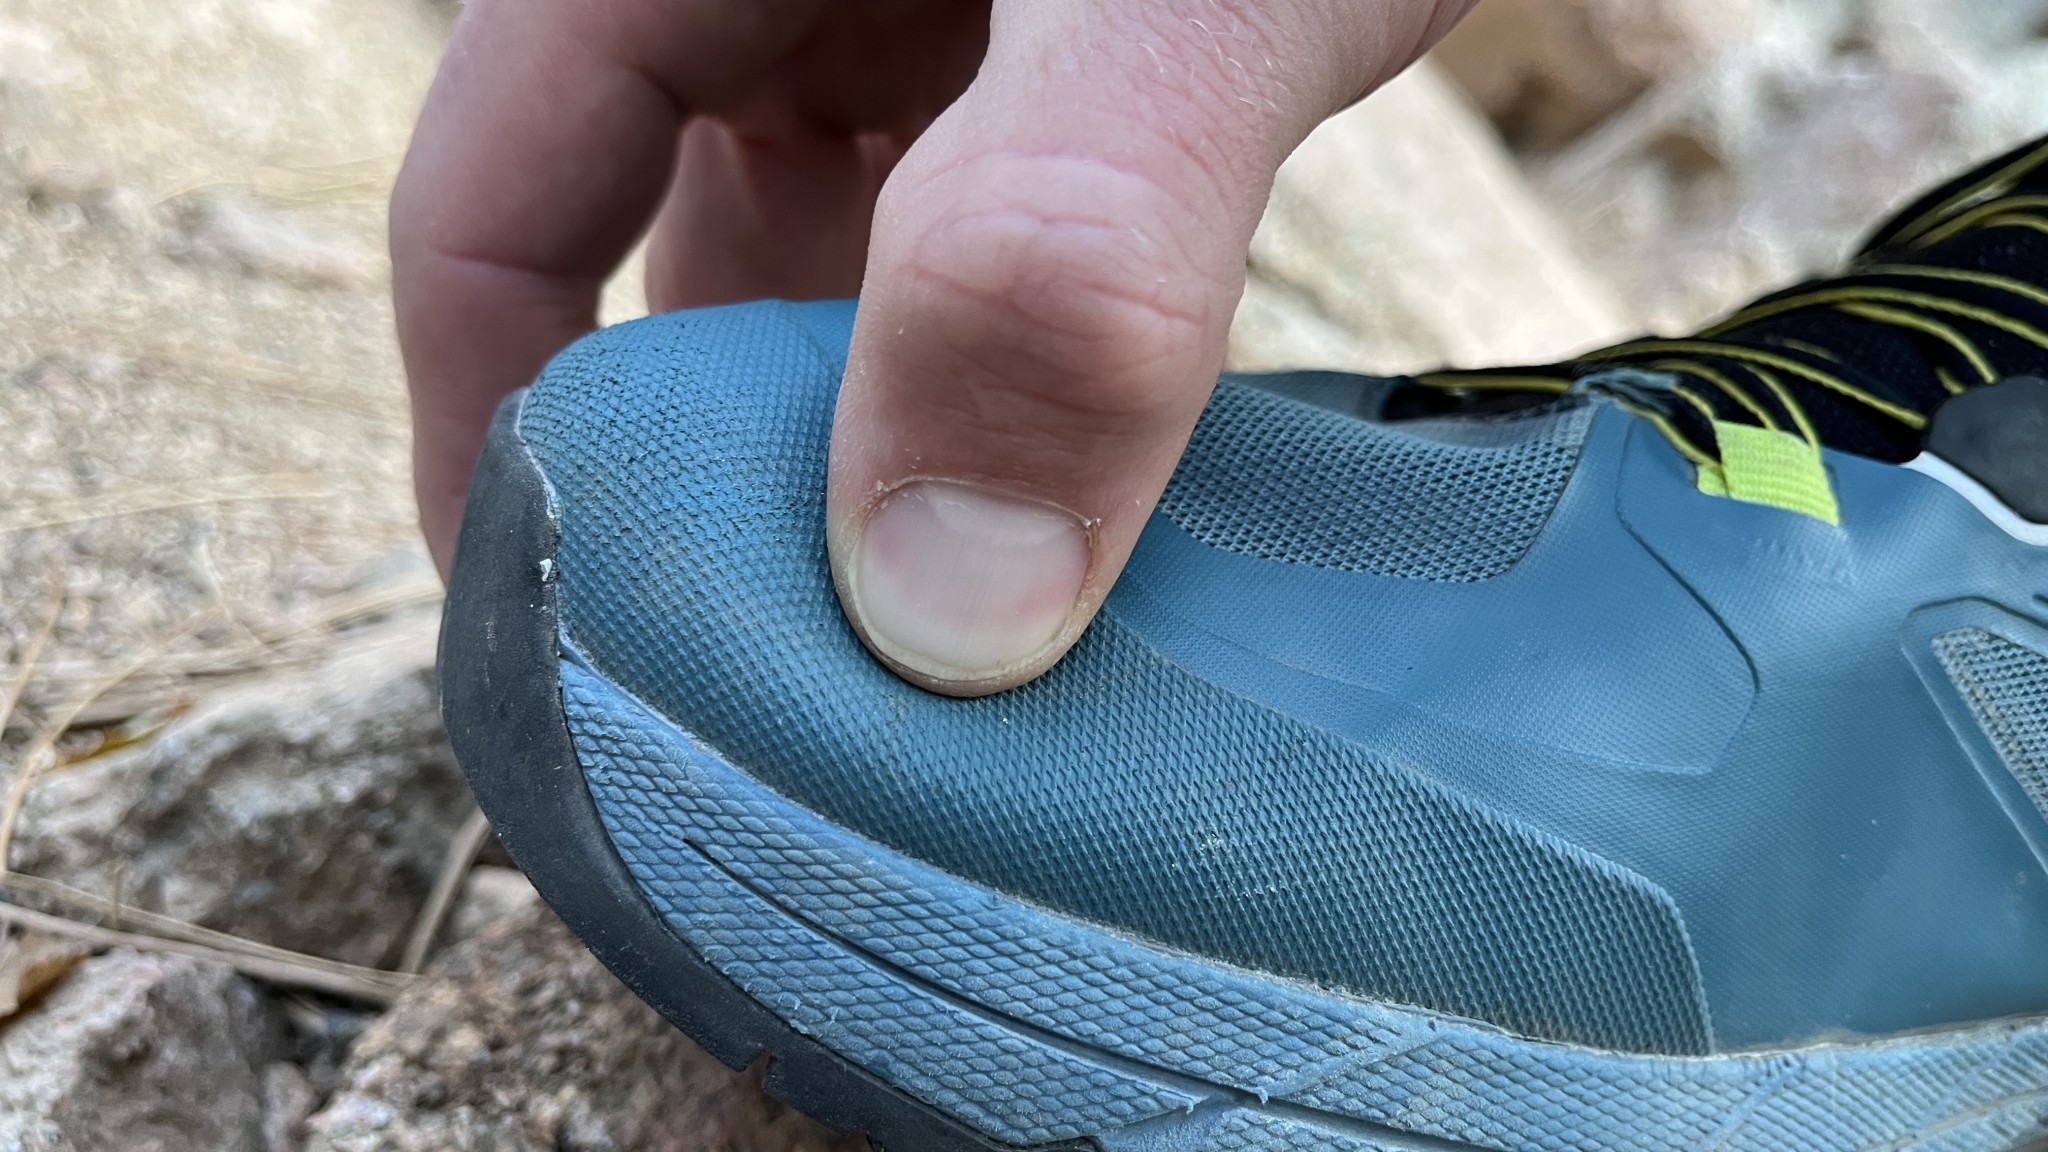 Scarpa Rapid Review | Tested by GearLab